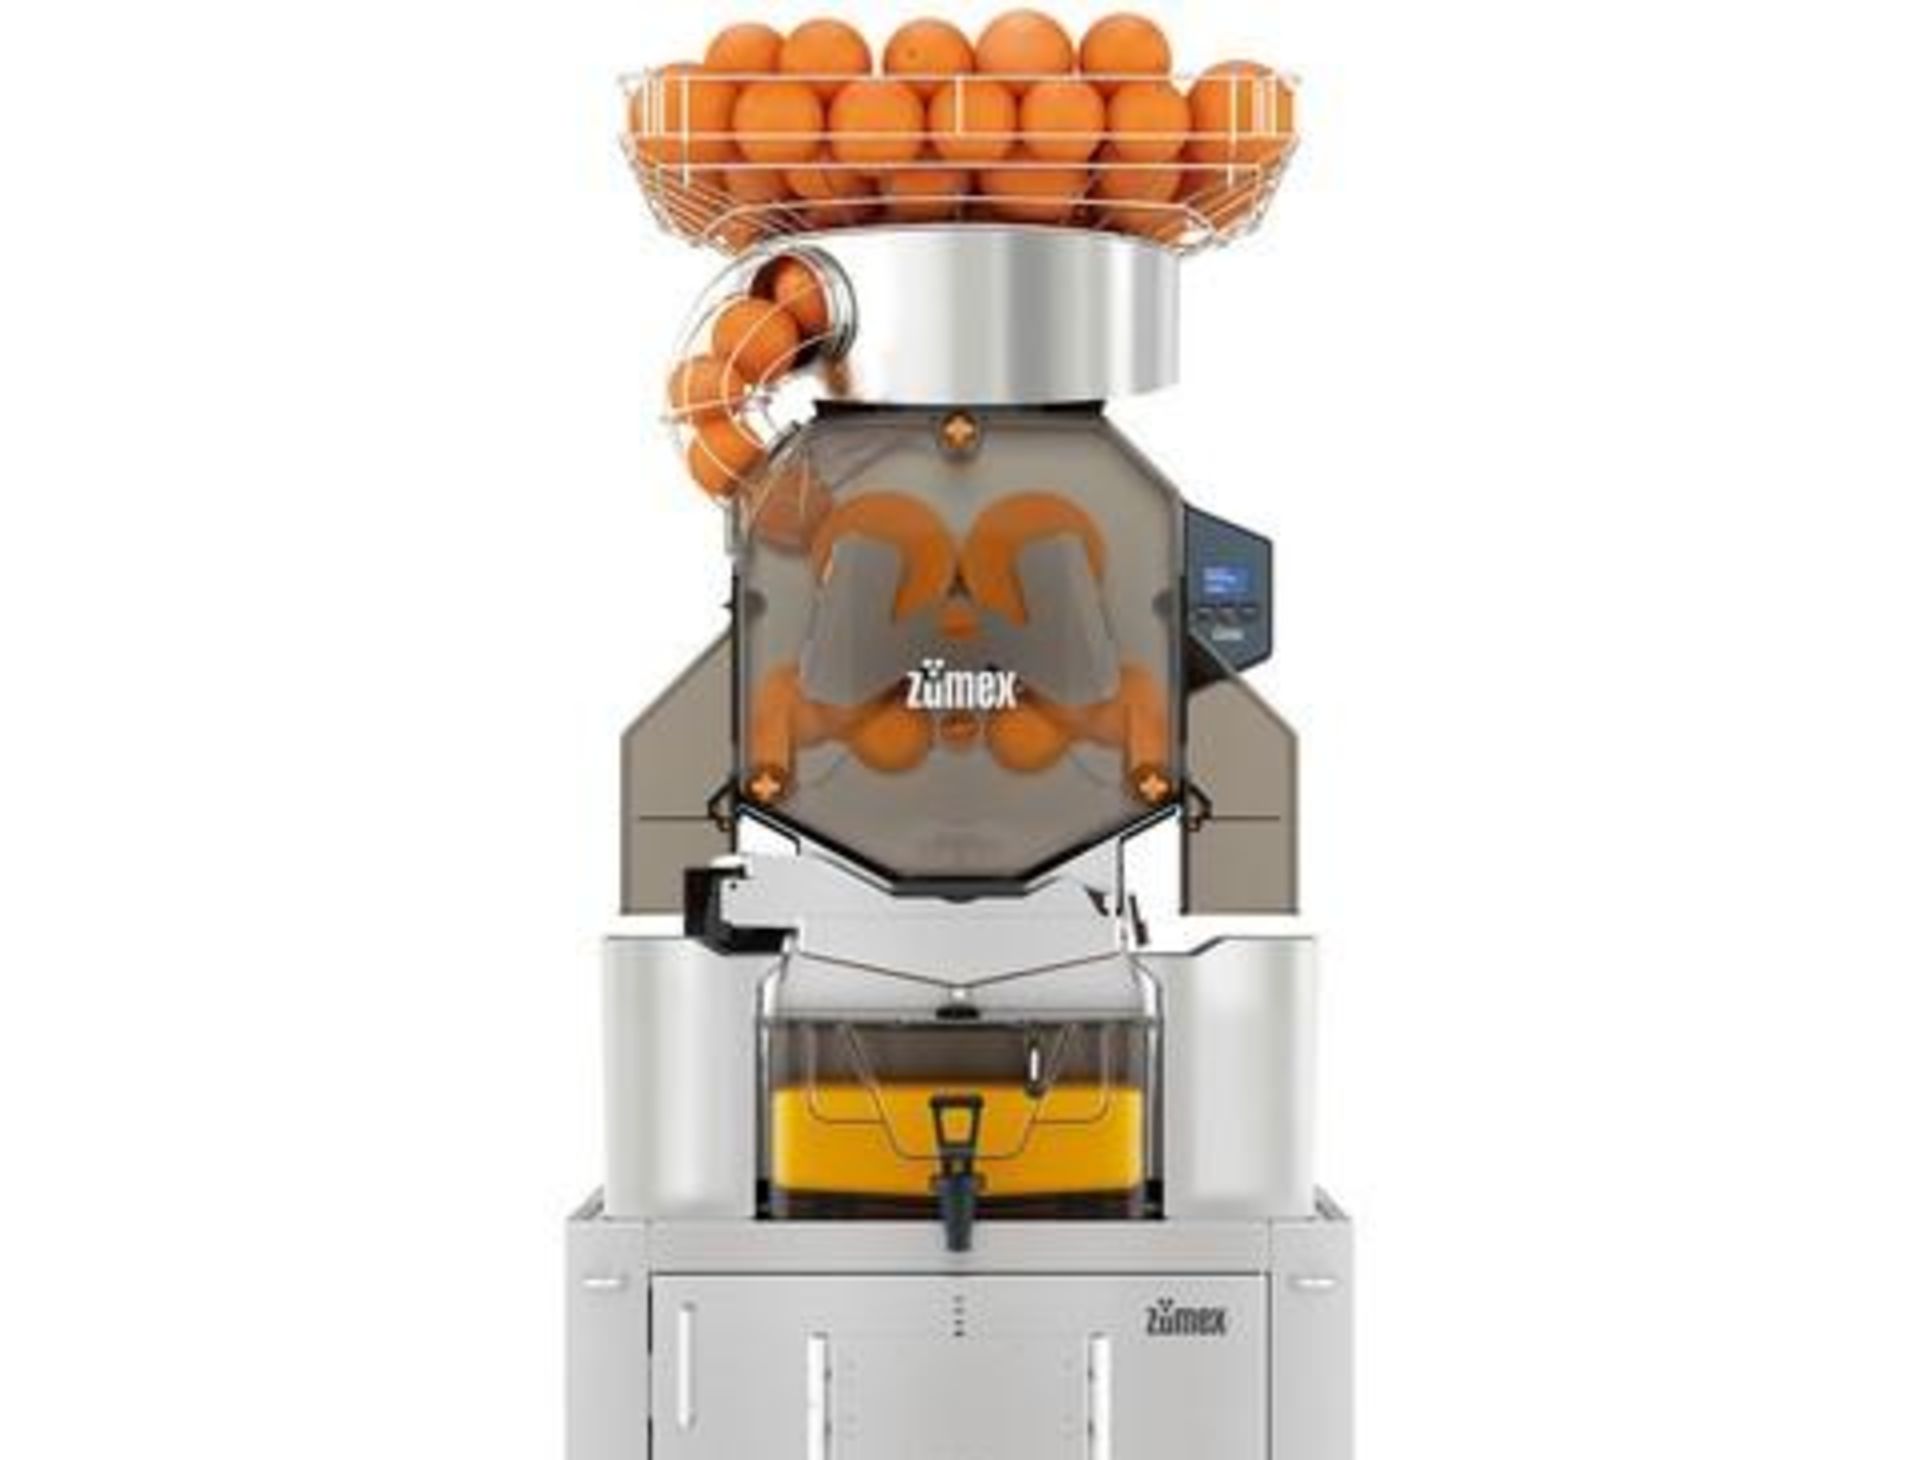 1 x Zumex Speed S +Plus Self-Service Podium Commercial Citrus Juicer - Manufactured in 2018 - Ideal - Image 8 of 21